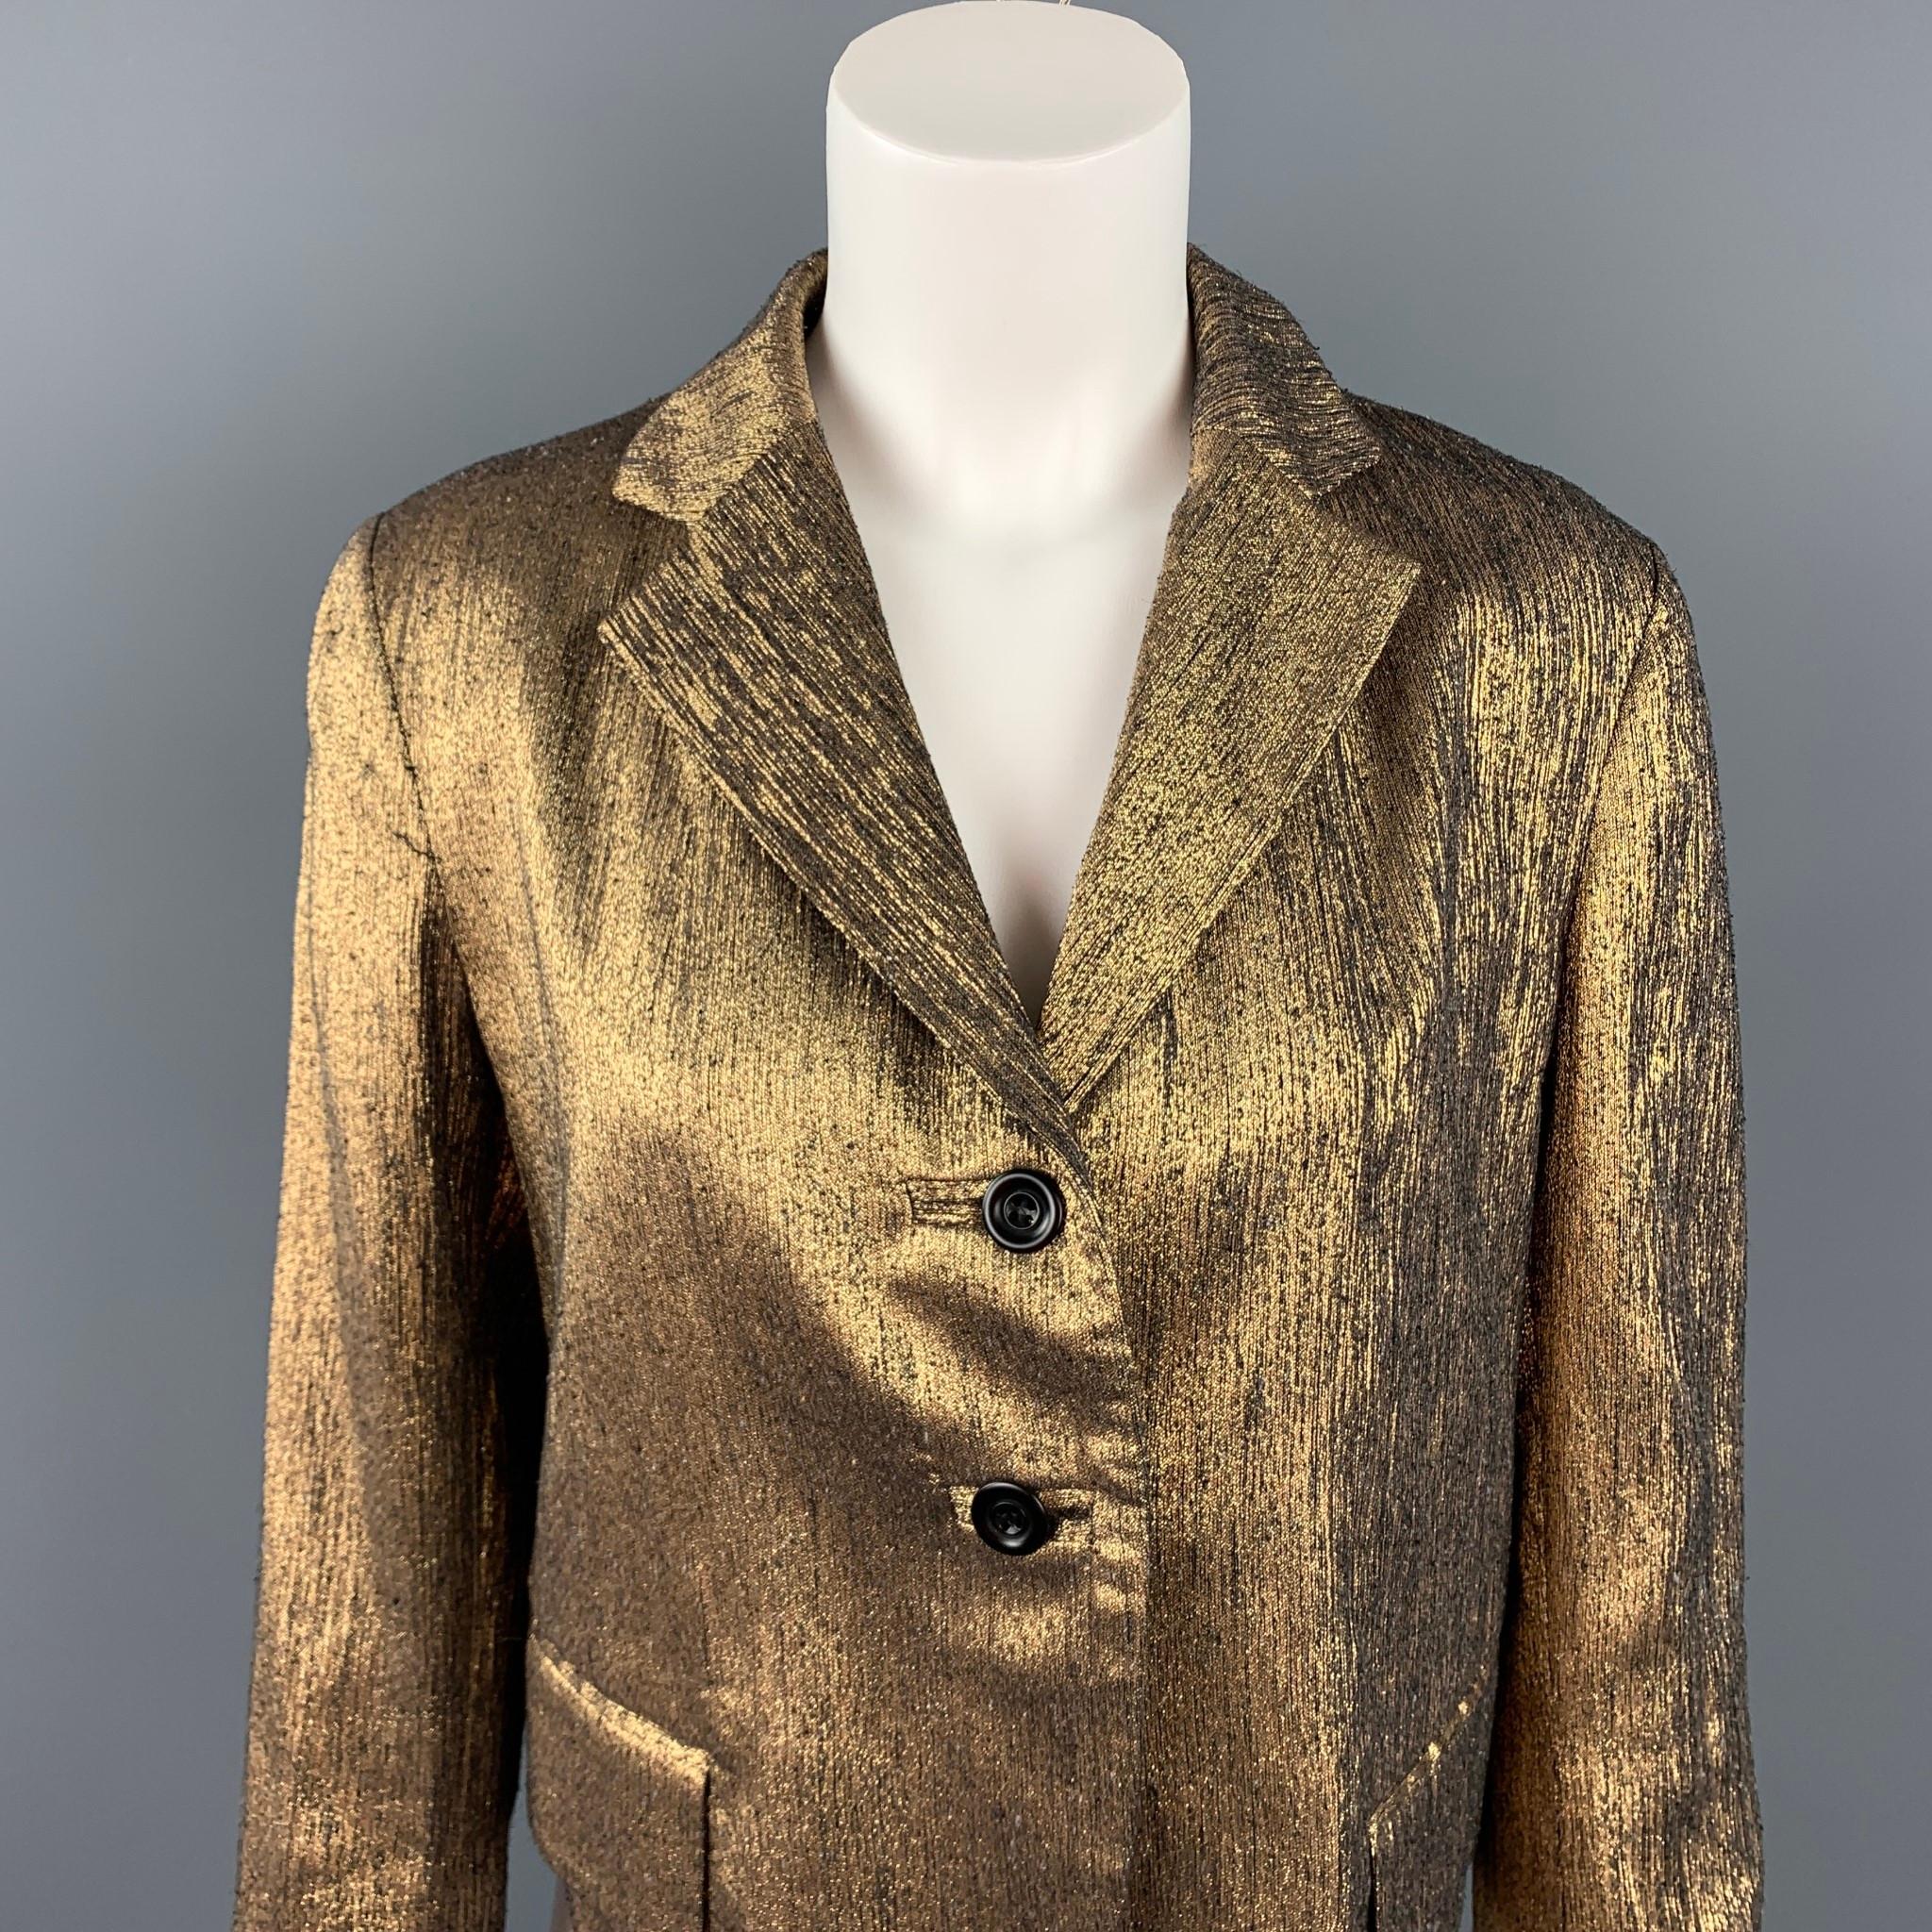 DRIES VAN NOTEN blazer comes in a gold textured silk blend with a full liner featuring a notch lapel, flap pockets, and a two button closure. Made in Belgium.

Good Pre-Owned Condition.
Marked: 42

Measurements:

Shoulder: 16 in.
Bust: 38